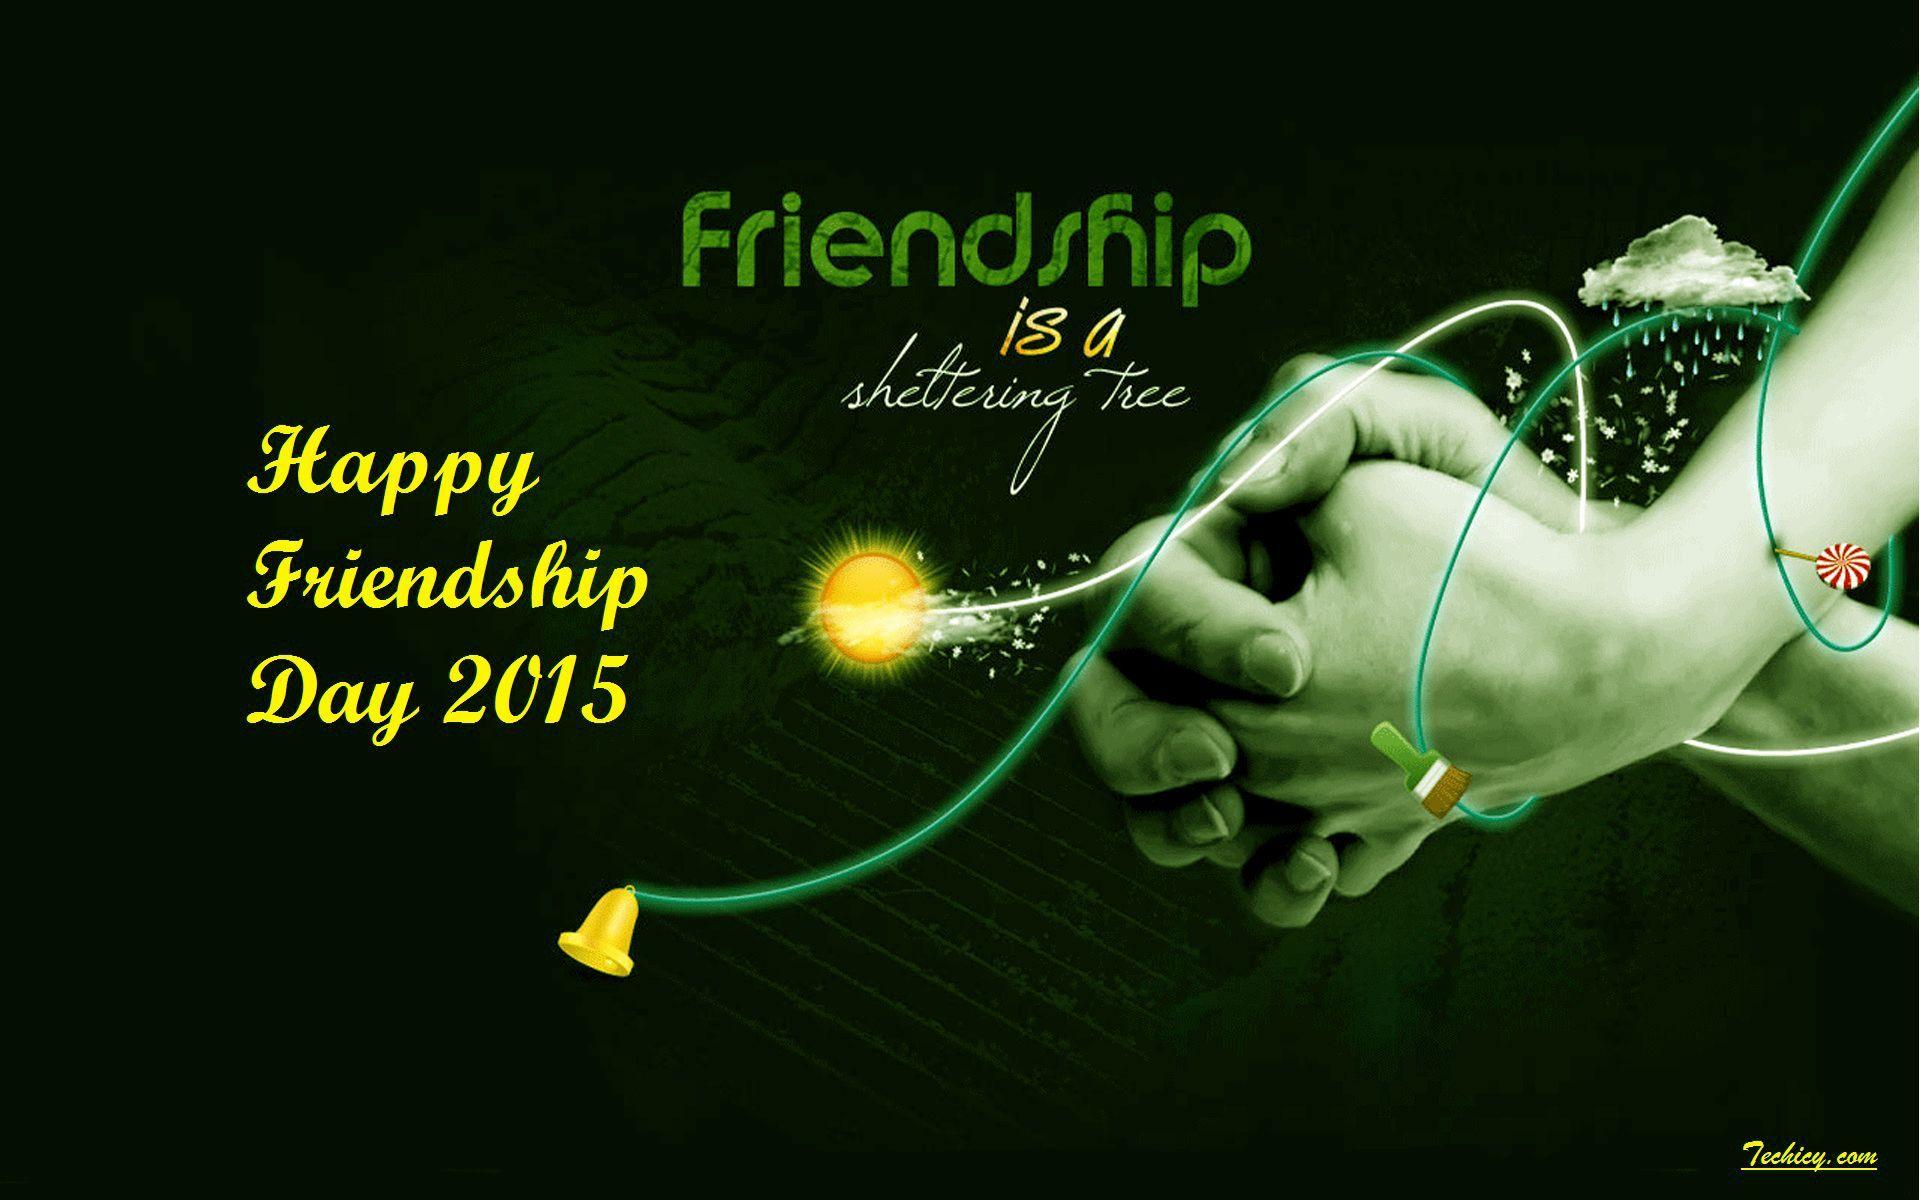 Happy* Friendship Day HD Image, Wallpaper, Pics, and Photo